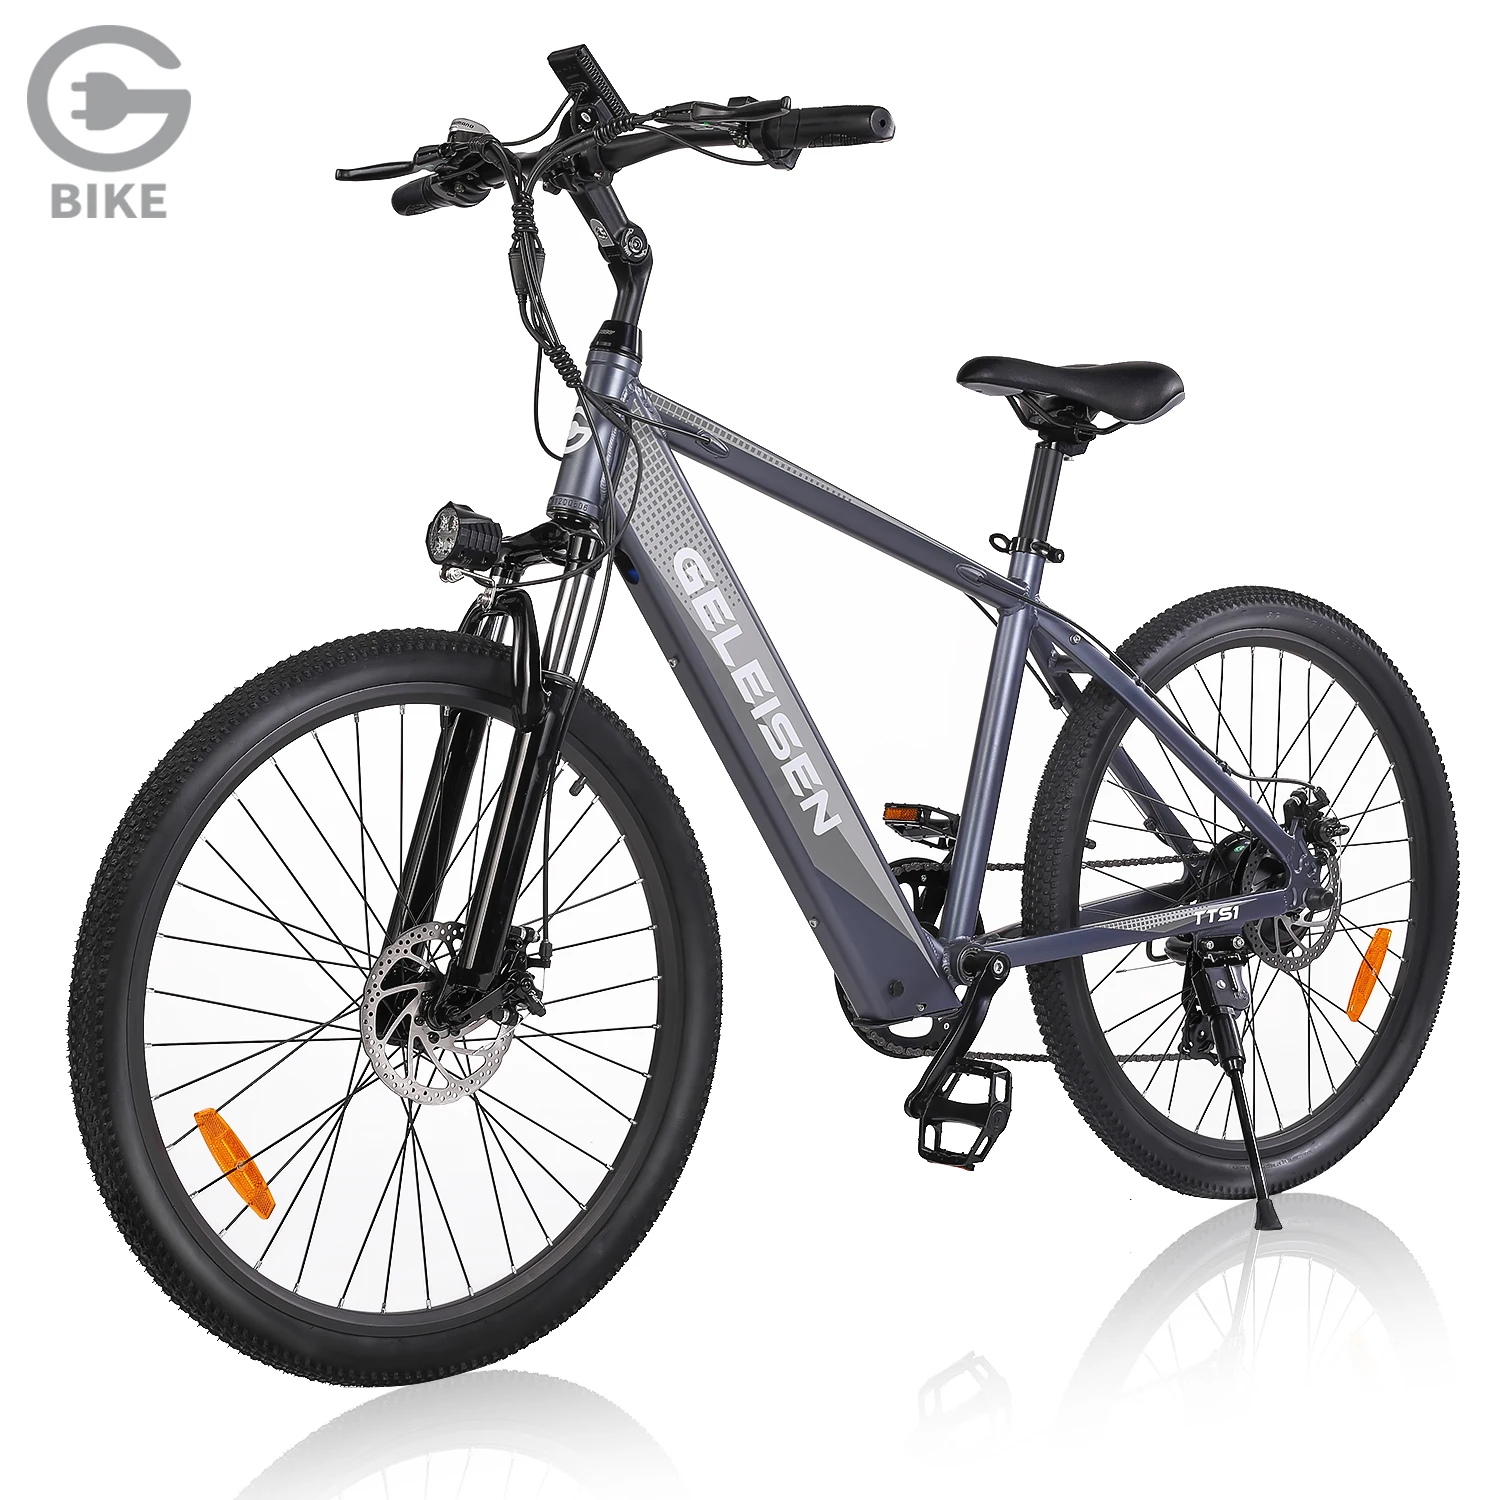 

GELEISEN EU US Warehouse Drop Shipping Portable 26 Inch Ebike S2 Adult Electric Mountain Bike 350W 36V Foldable Electric Bicycle, Silver